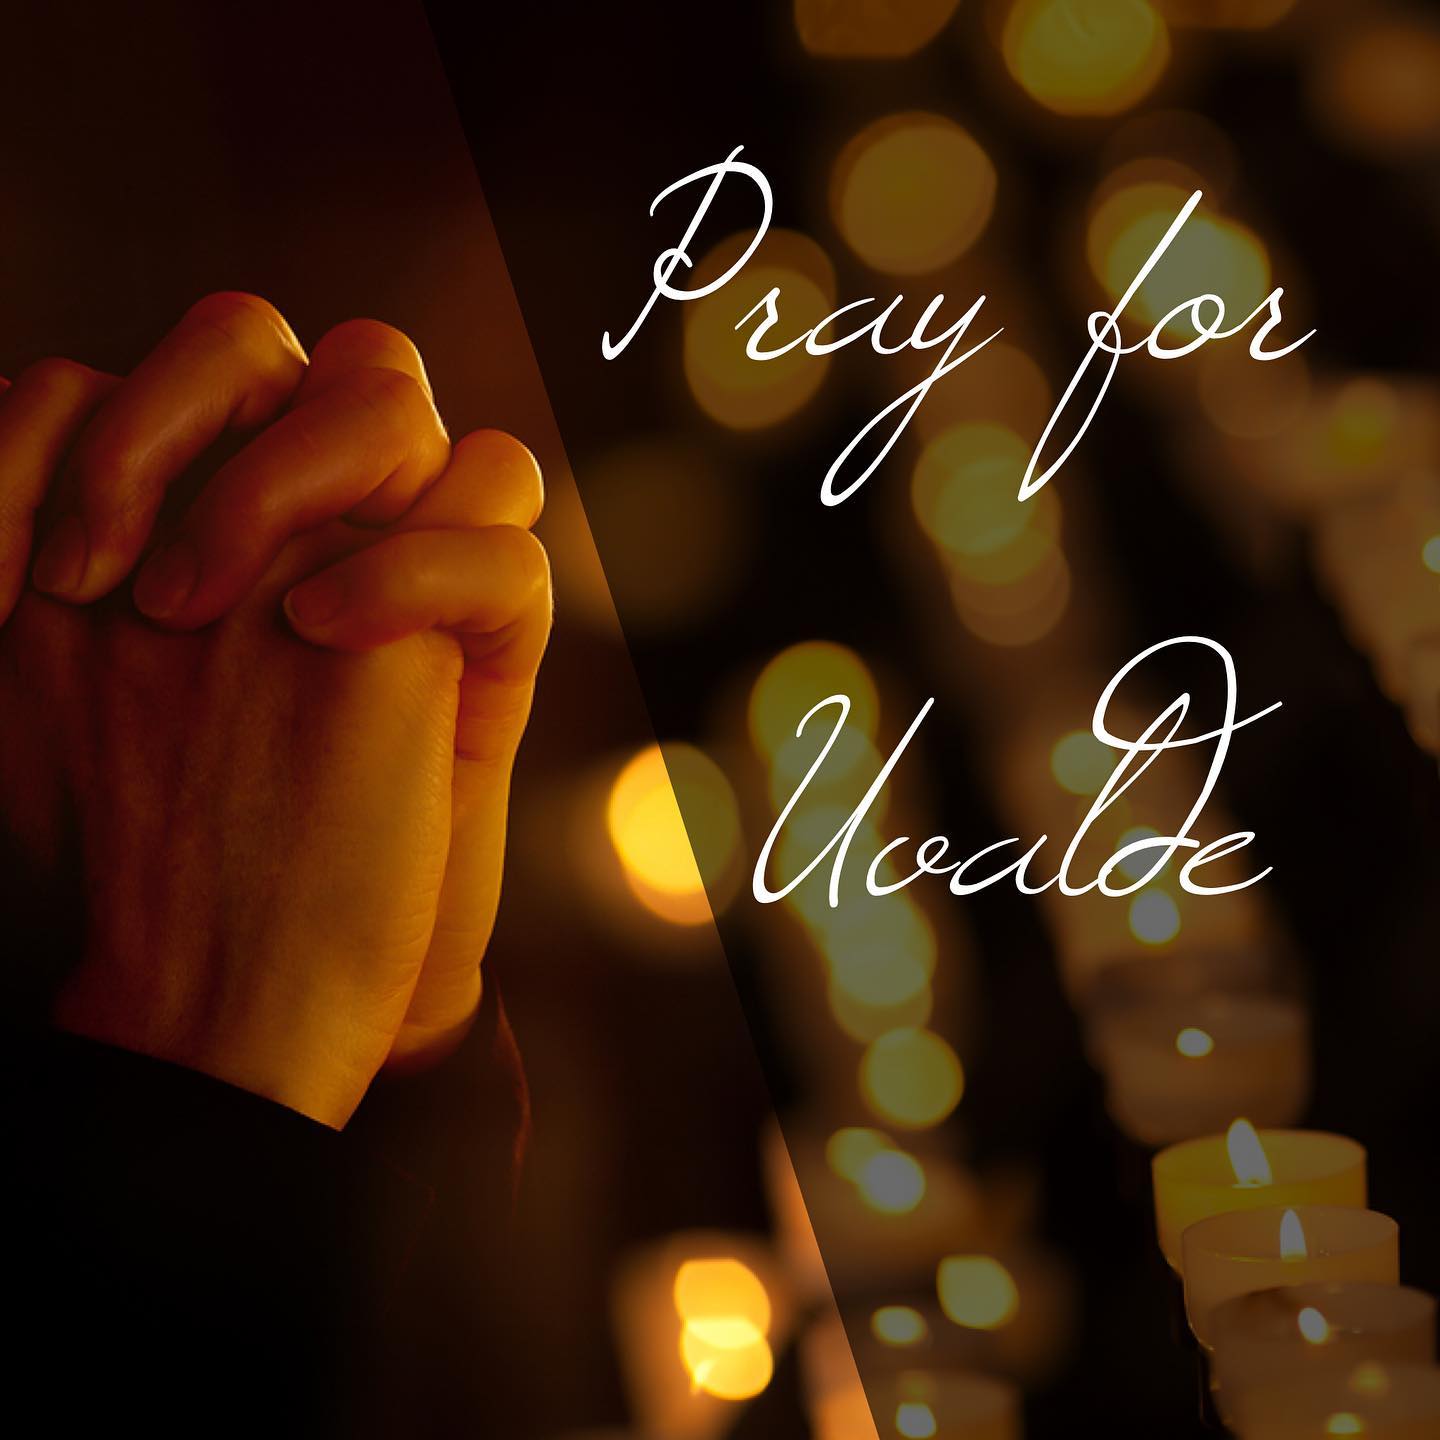 “The victims of the horrific school shooting yesterday in Uvalde, Texas, are in my prayers this morning. Please join me in praying for them, their loved ones and their wounded community, that they may feel the loving and consoling presence of God in their grief. We as a Catholic community that believes in the sacredness of human life must also do more. We need better gun laws to protect people. We need more mental health resources. And we need to bridge whatever political and ideological differences we may have in our Catholic community so we can be authentic witnesses to a Gospel of life, end such violence, and better care for our neighbors.” -Bishop Donald Kettler.  #uvalde #uvaldemassacre  #children #safety